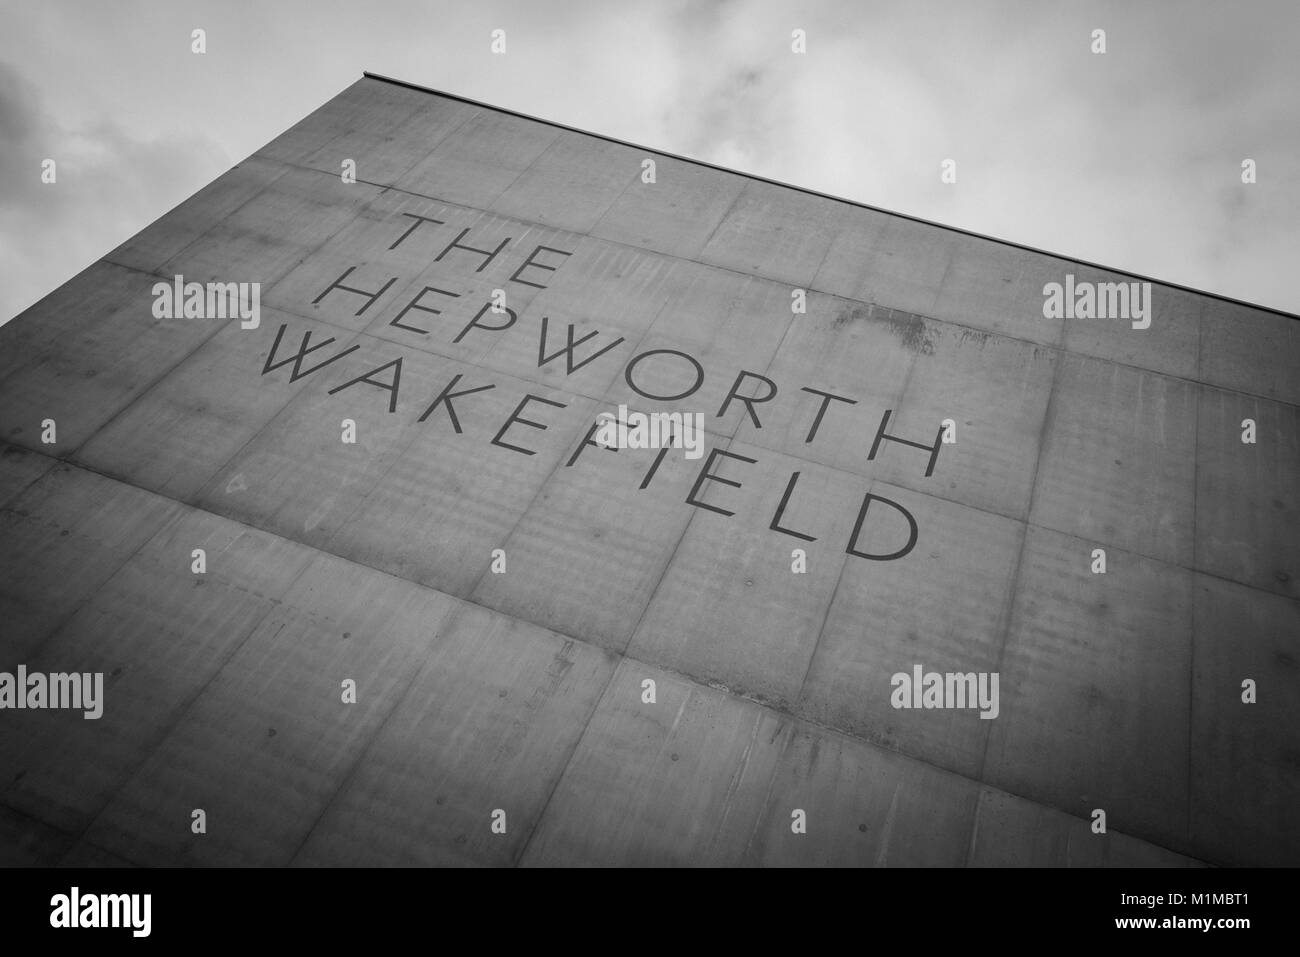 Black and White Abstract images of the exterior of The Hepworth Museum, Wakefield, Yorkshire PHILLIP ROBERTS Stock Photo